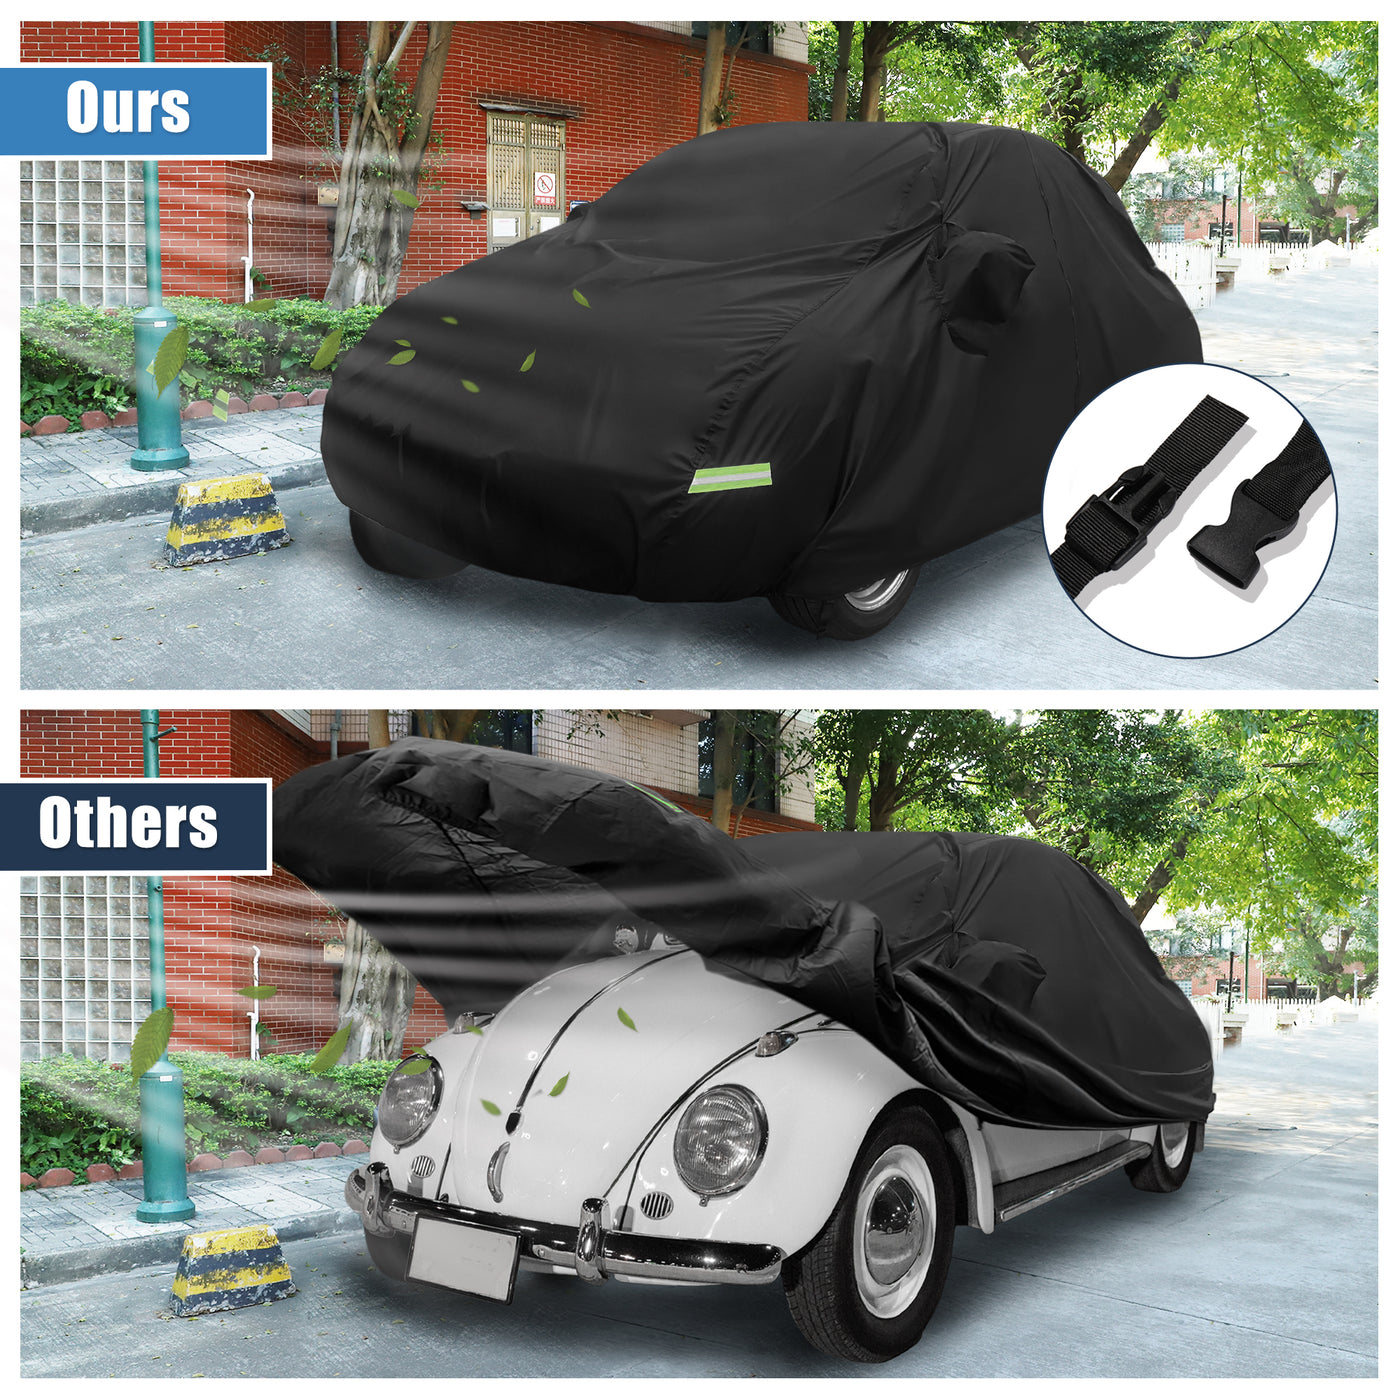 X AUTOHAUX Waterproof Car Cover for Volkswagen New Beetle 1998-2019 Outdoor Full Car Cover All Weather Protection Rain Sun Protection with Zipper Black